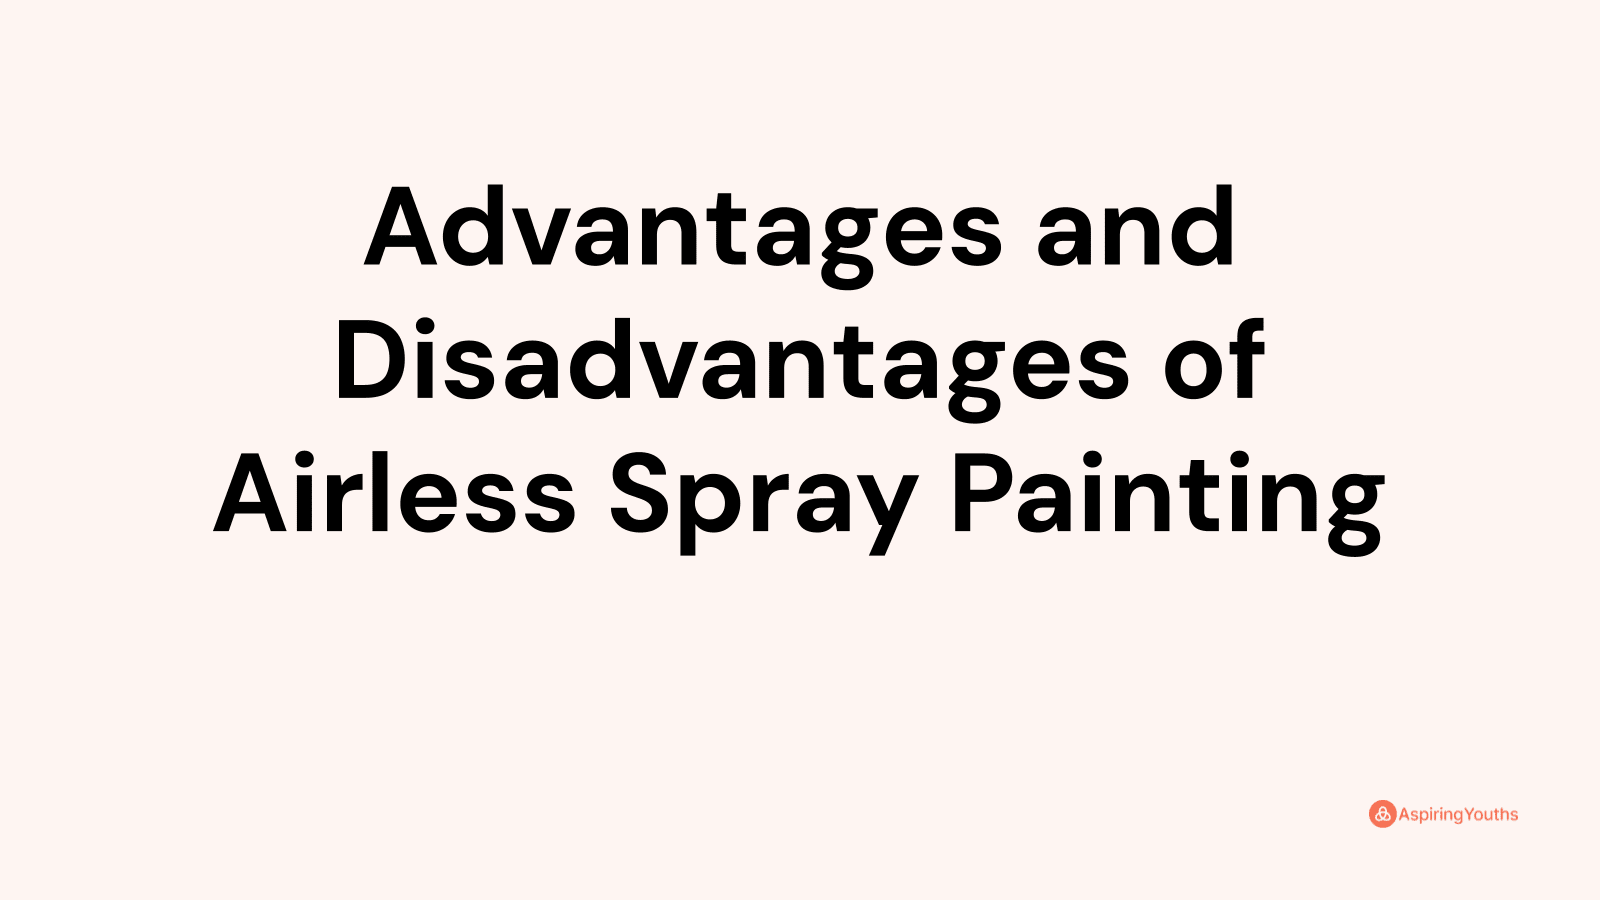 Advantages and disadvantages of Airless Spray Painting